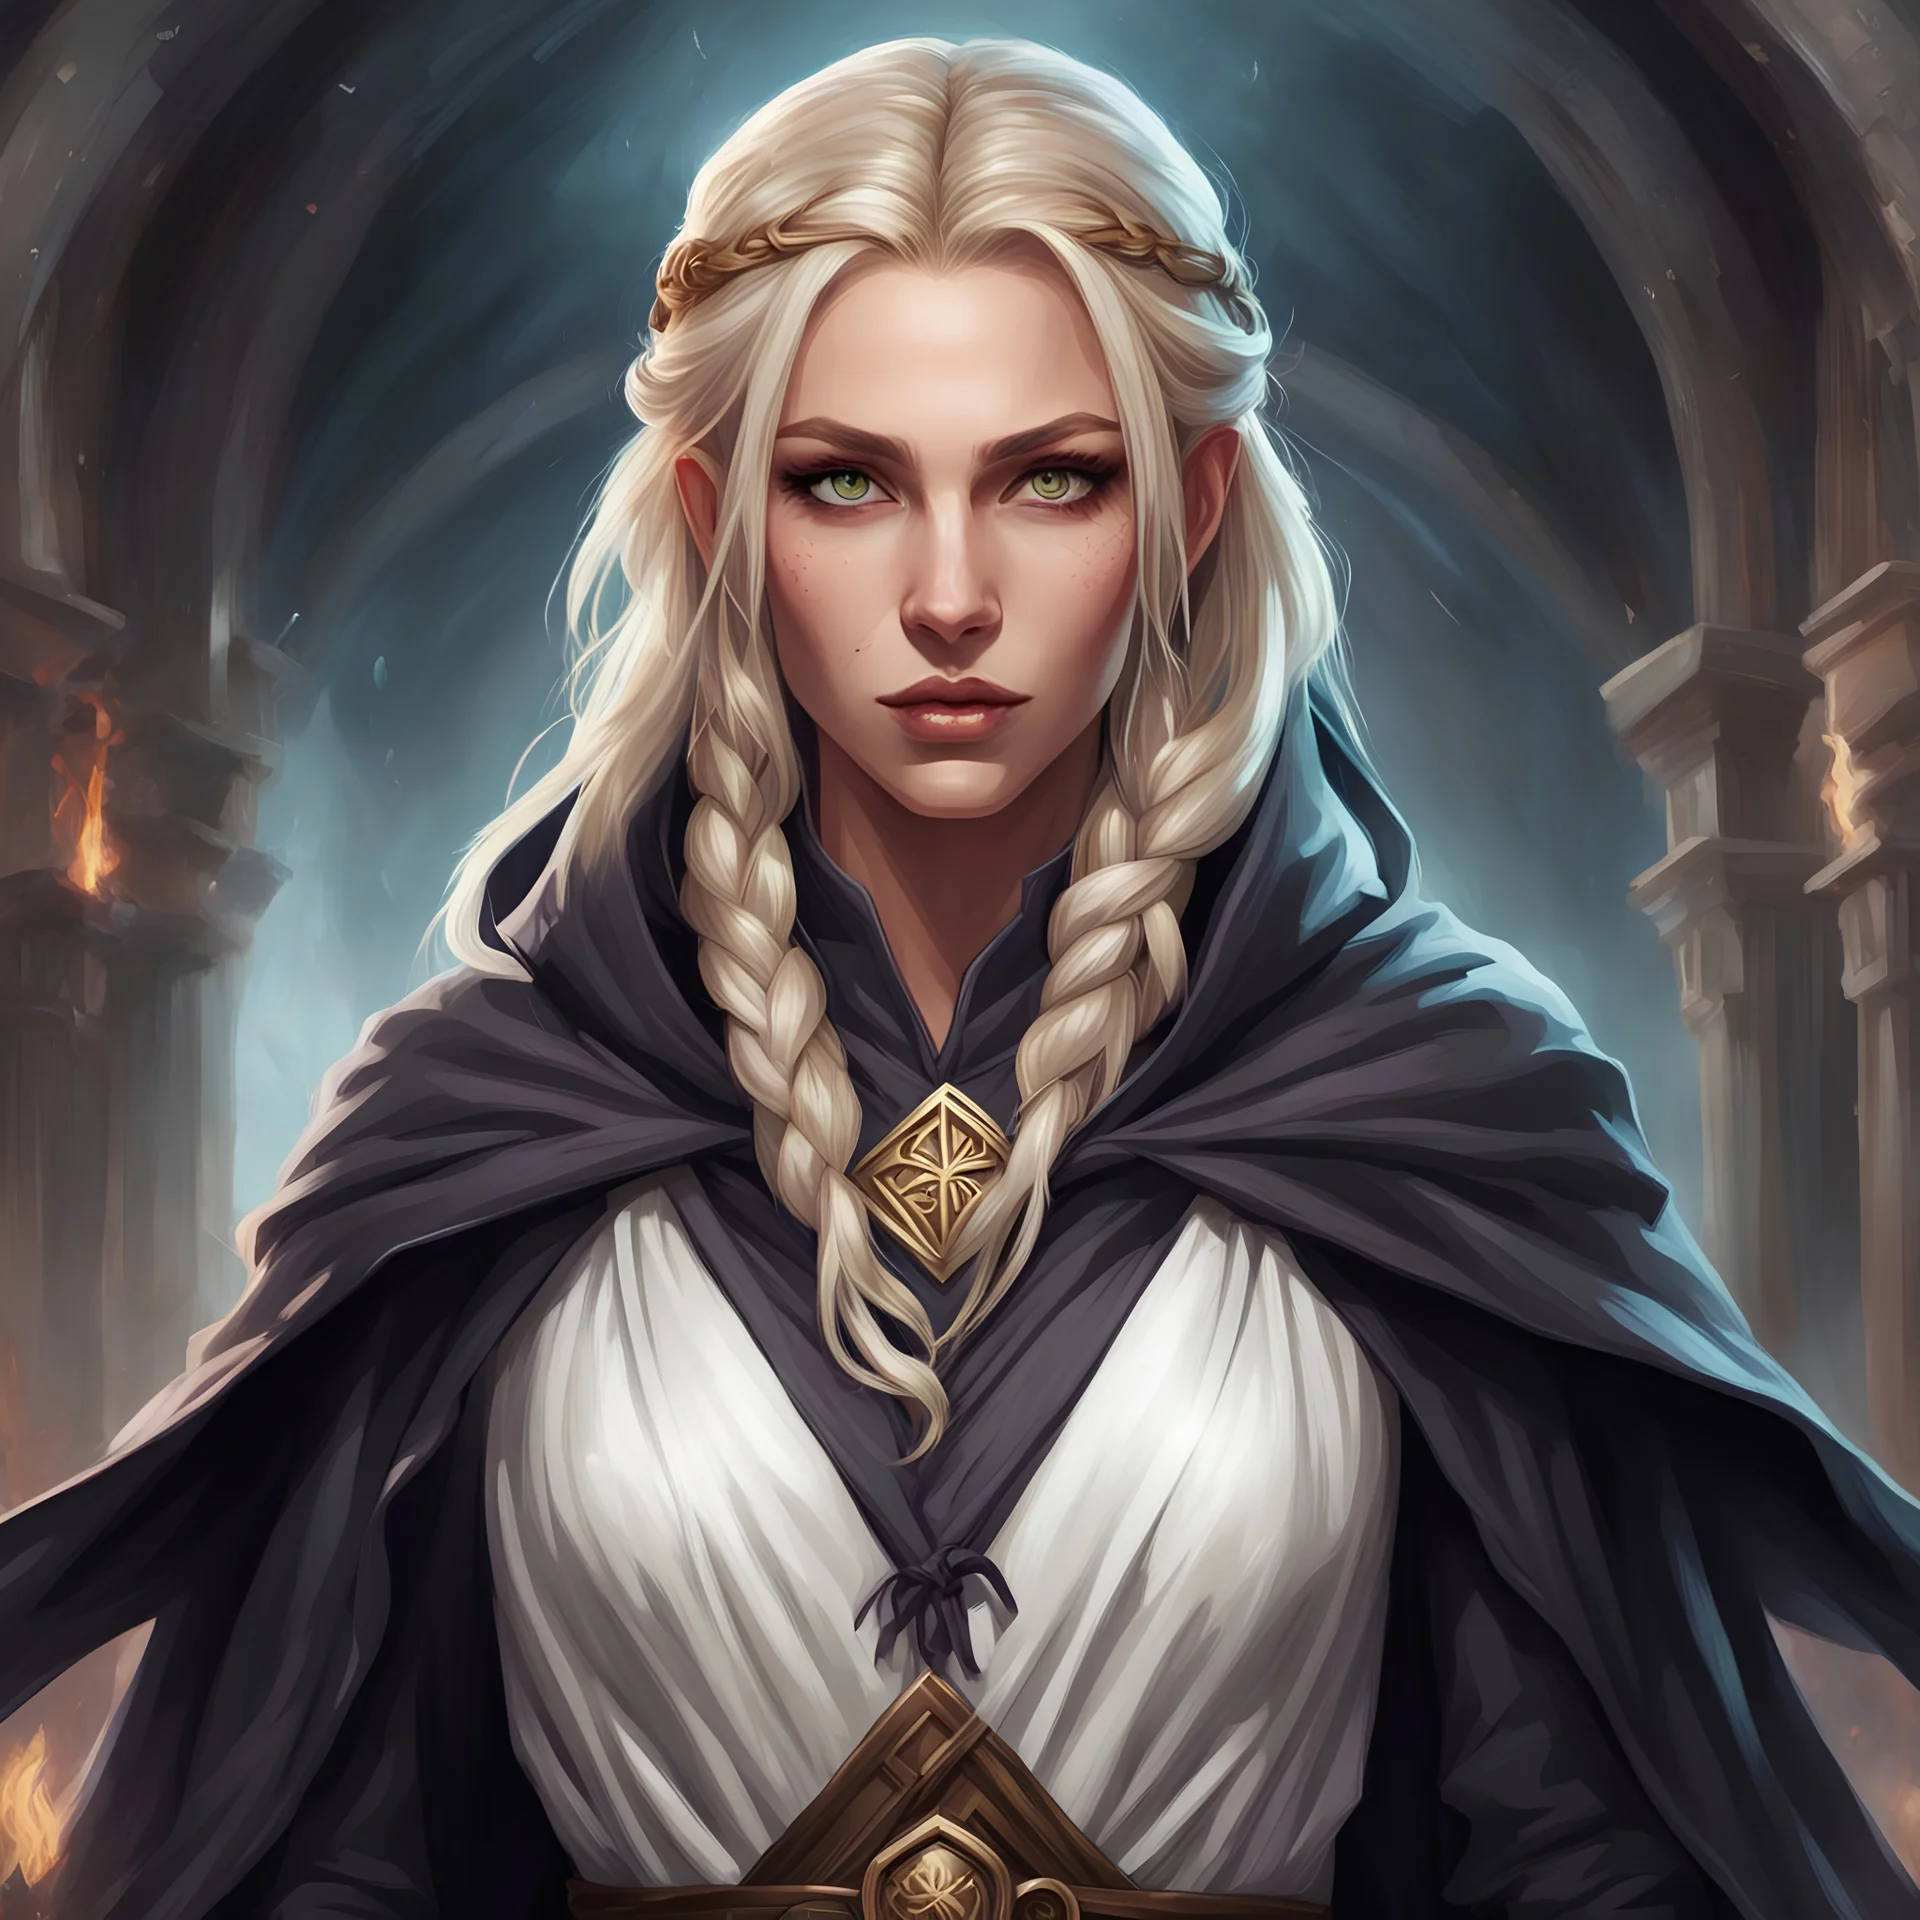 dungeons & dragons; digital art; portrait; female; wizard; sorceress; witch; ash blonde hair; young woman; flowing greek robes; cloak; hood; single braids; dark clothes; traveling clothes; confident